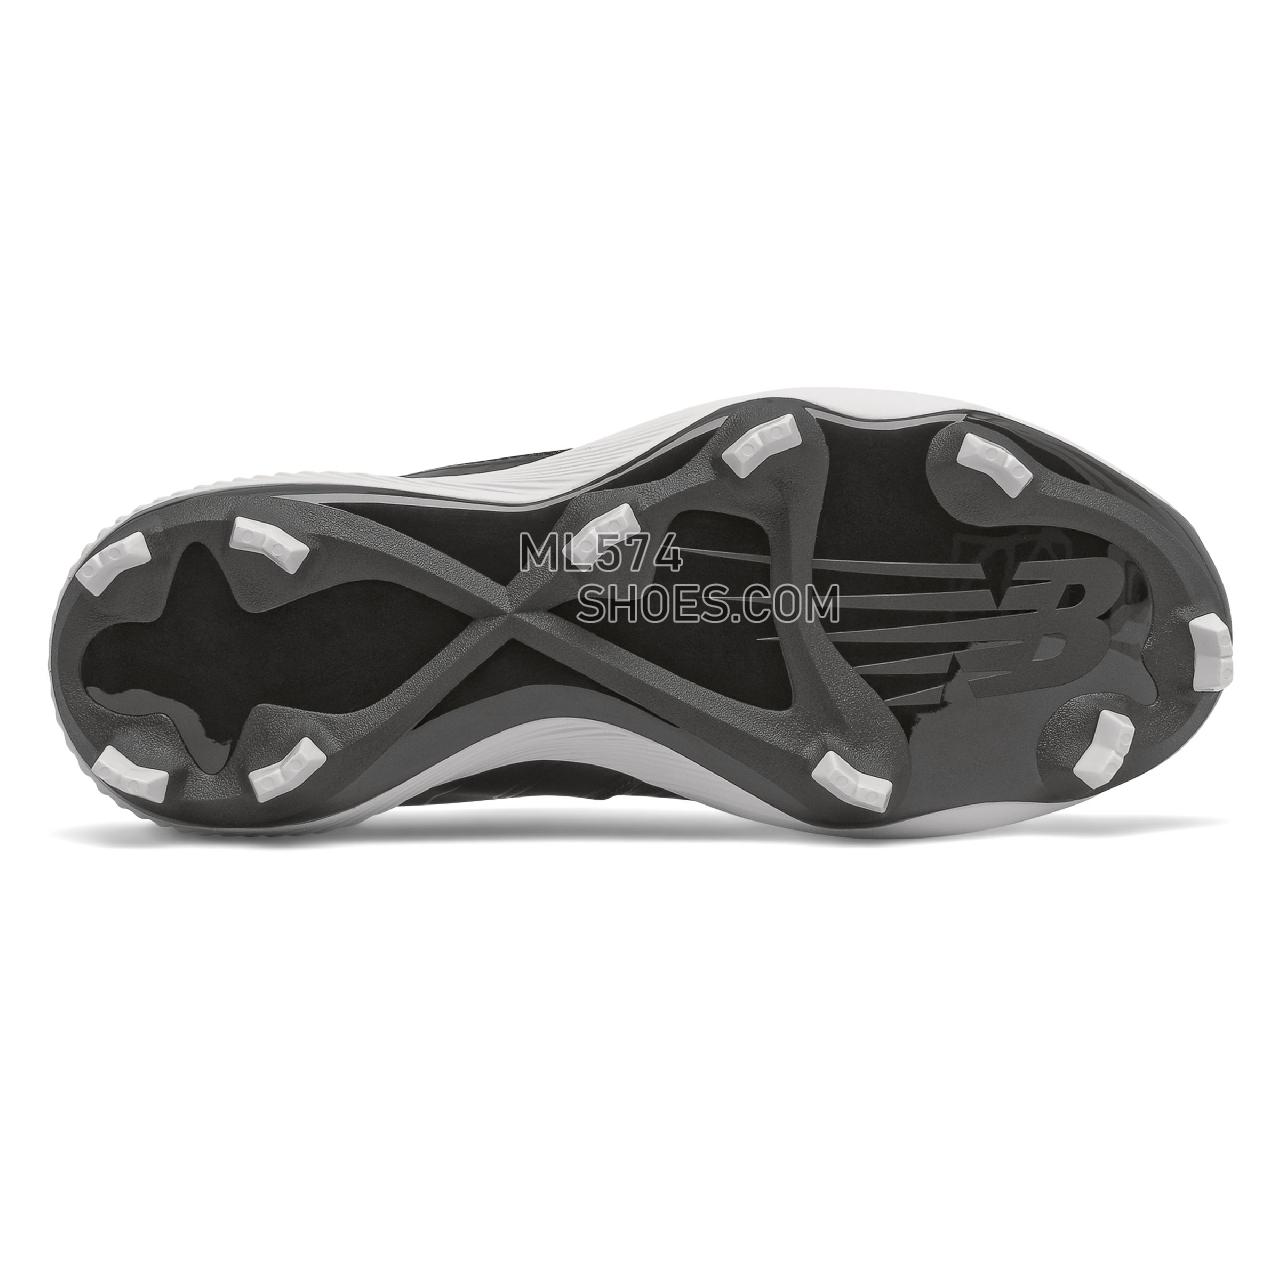 New Balance FuelCell FUSE v3 Molded - Women's Softball - Black with White - SPFUSEK3